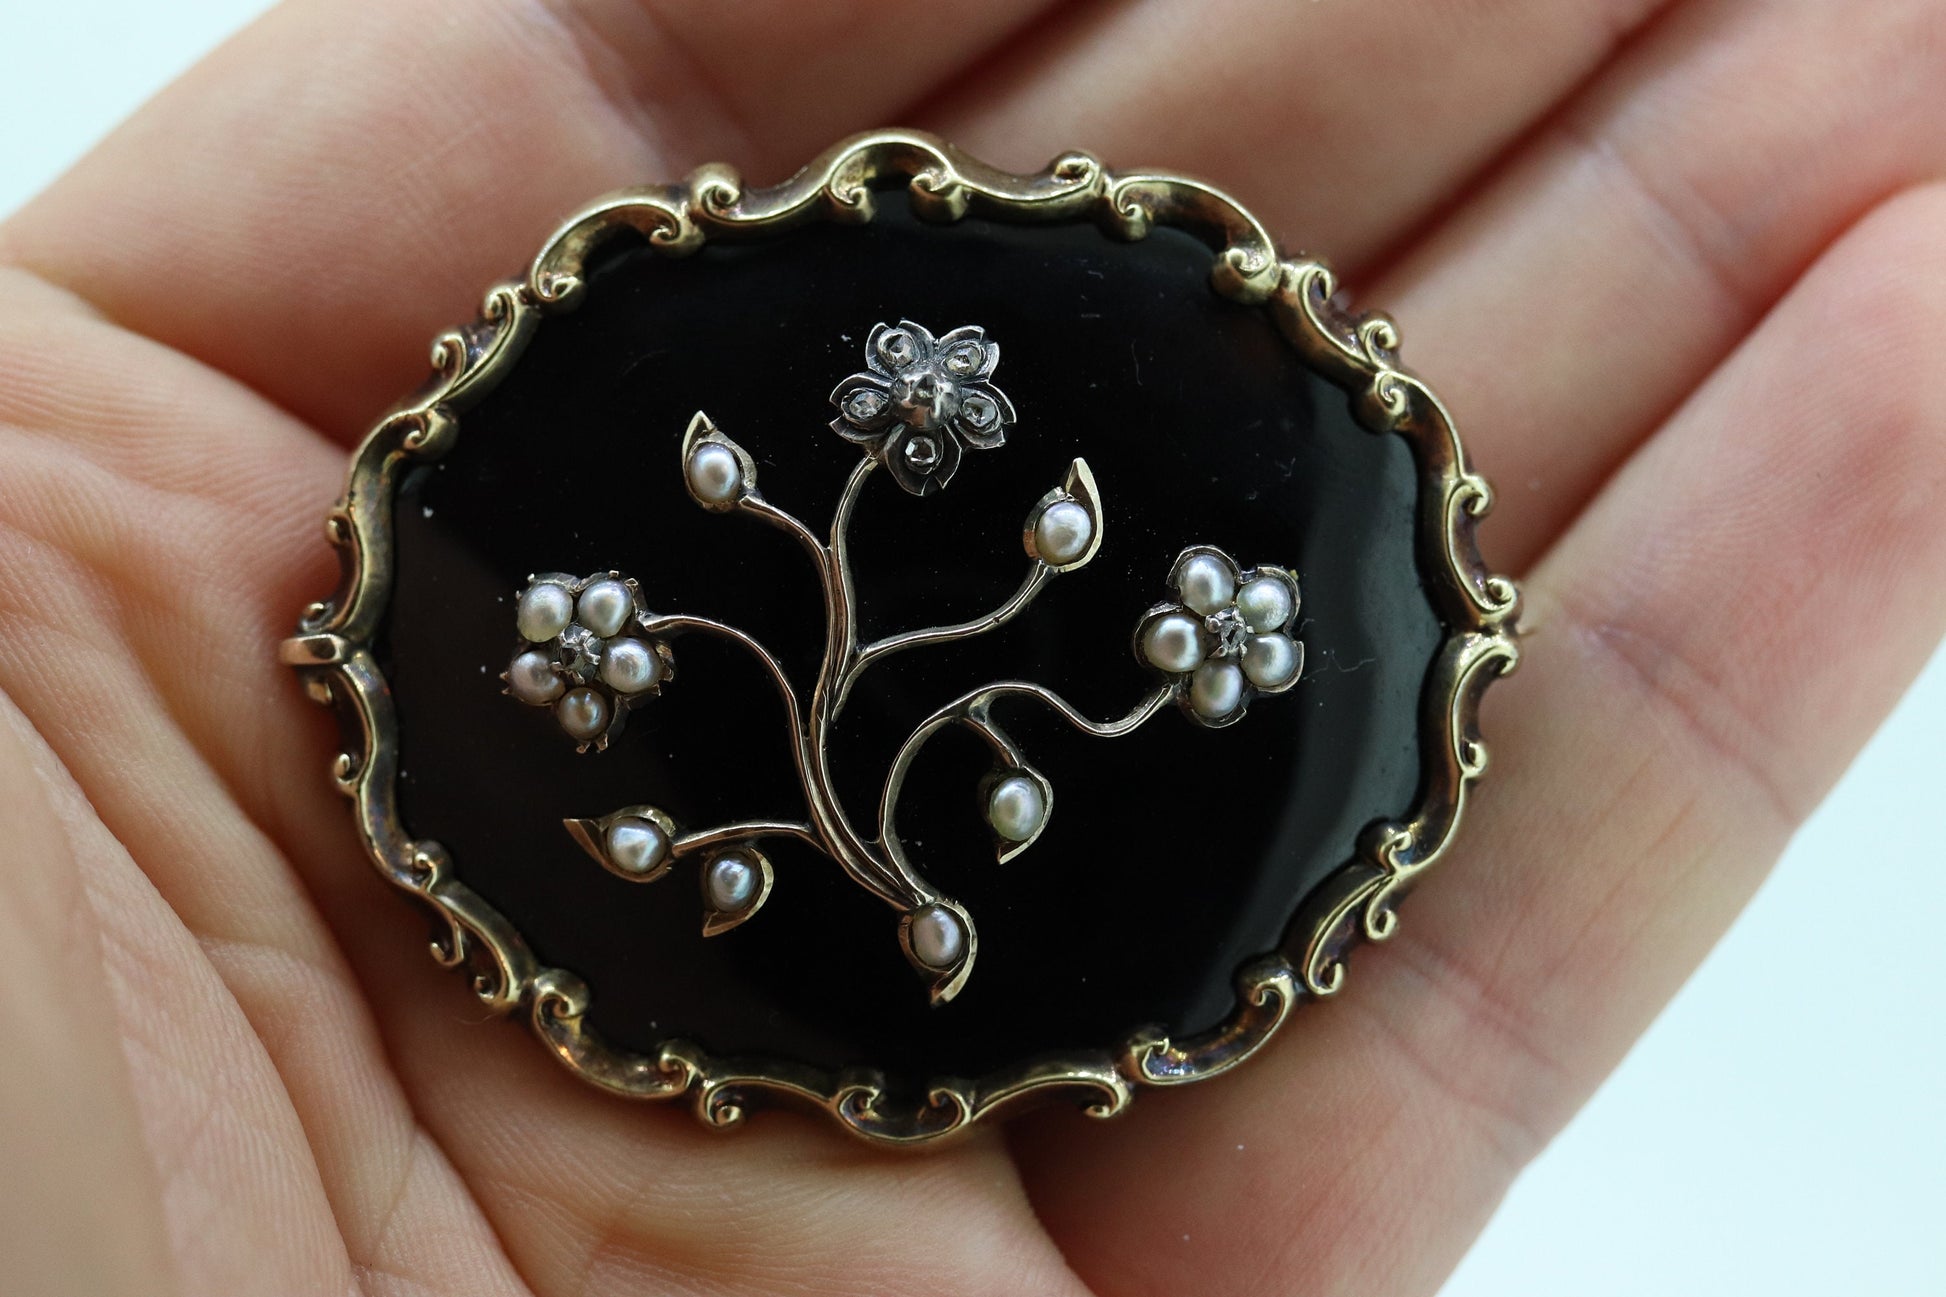 12k Victorian Black Enamel, Seed Pearls, Diamond and 12k gold and sterling silver, Mourning Brooch, c1840, Braided Hair Forget me not  260